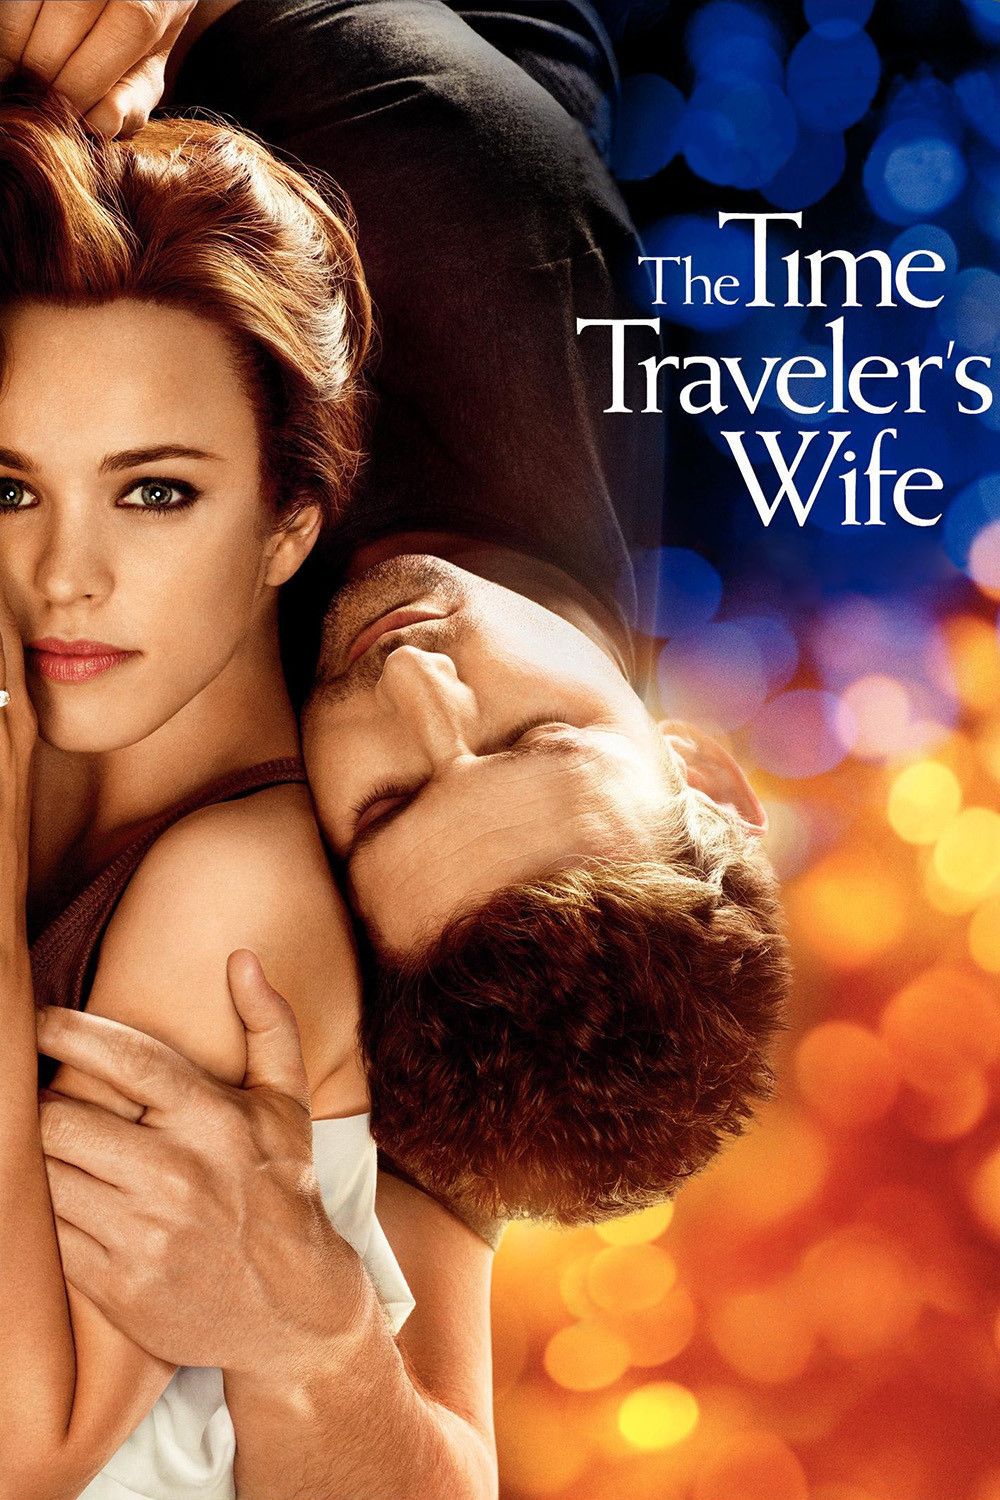 The Time Travelers Wife (2009) English (With Subtitles) BluRay download full movie